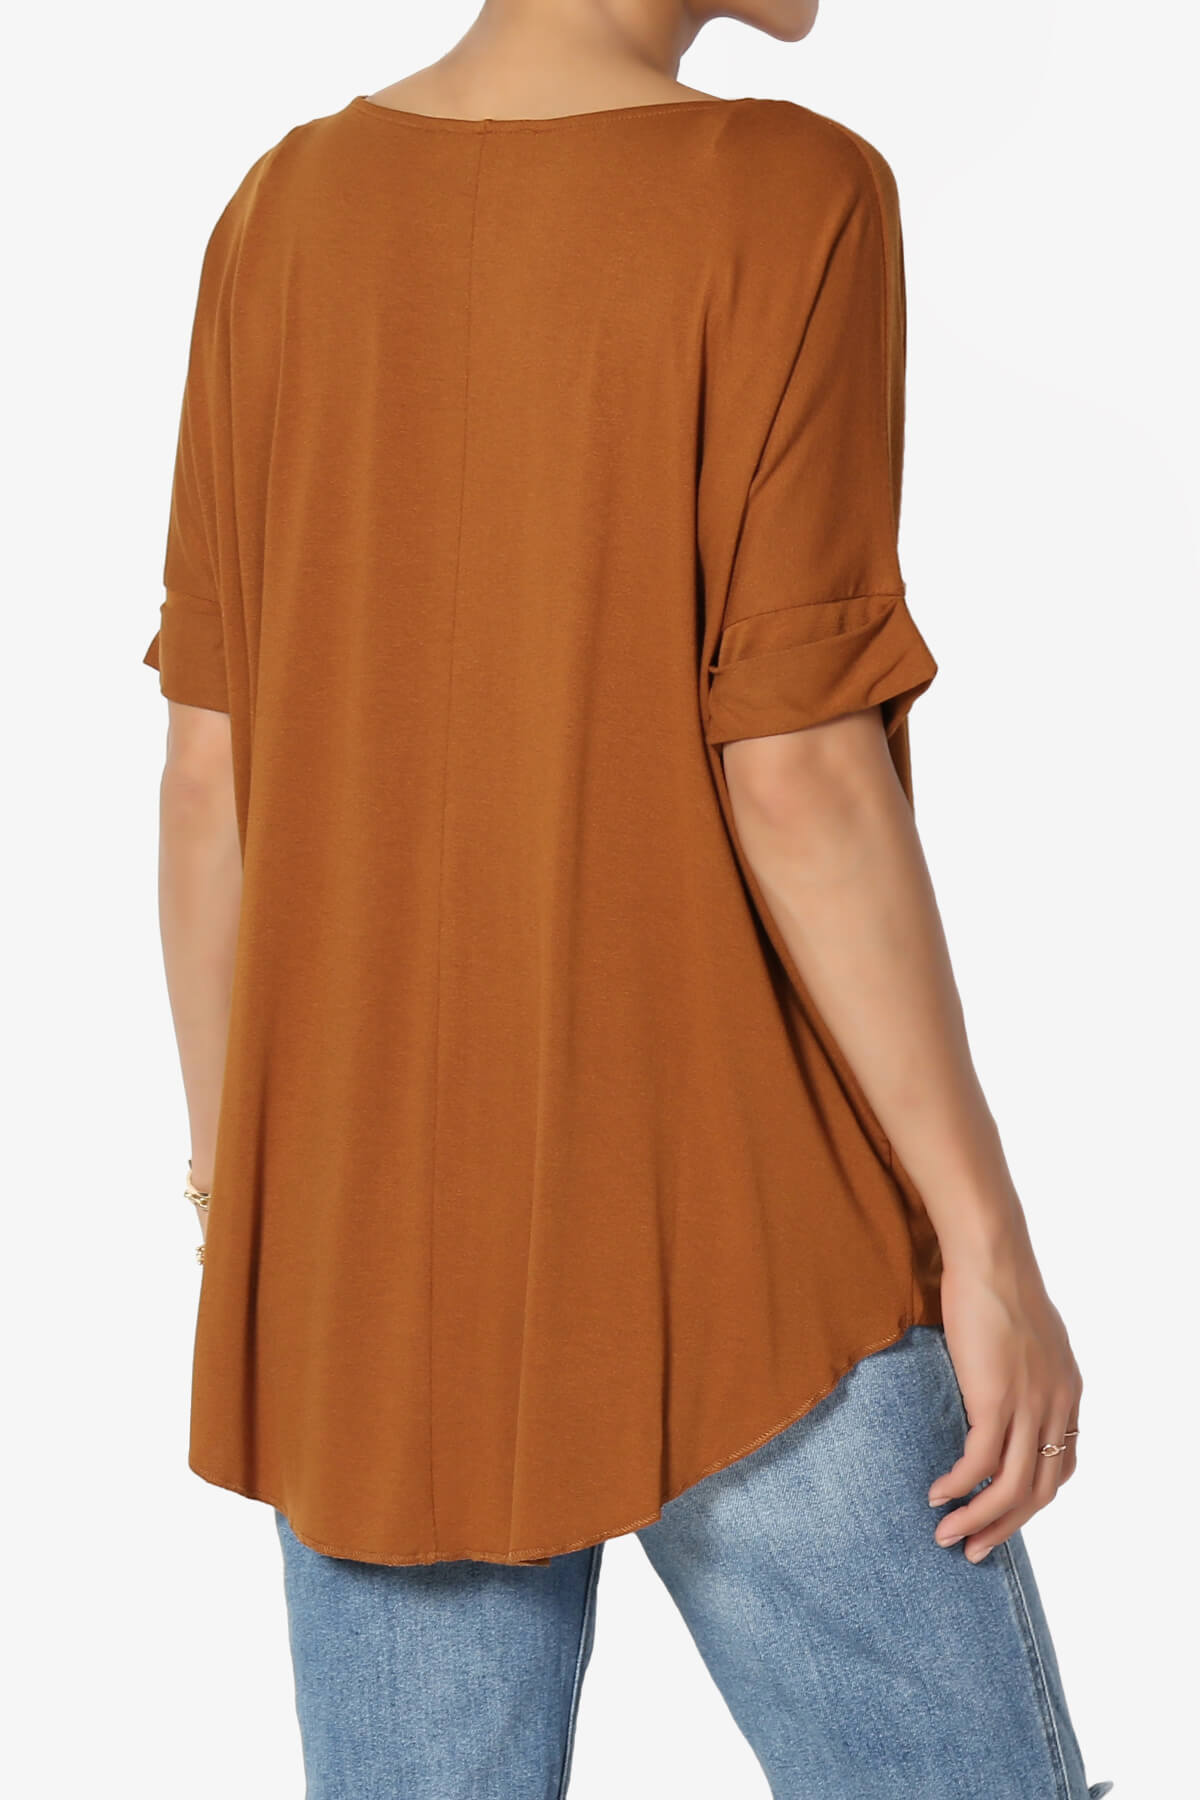 Load image into Gallery viewer, Tackle Wrap Hi-Low Crepe Knit Top ALMOND_4
